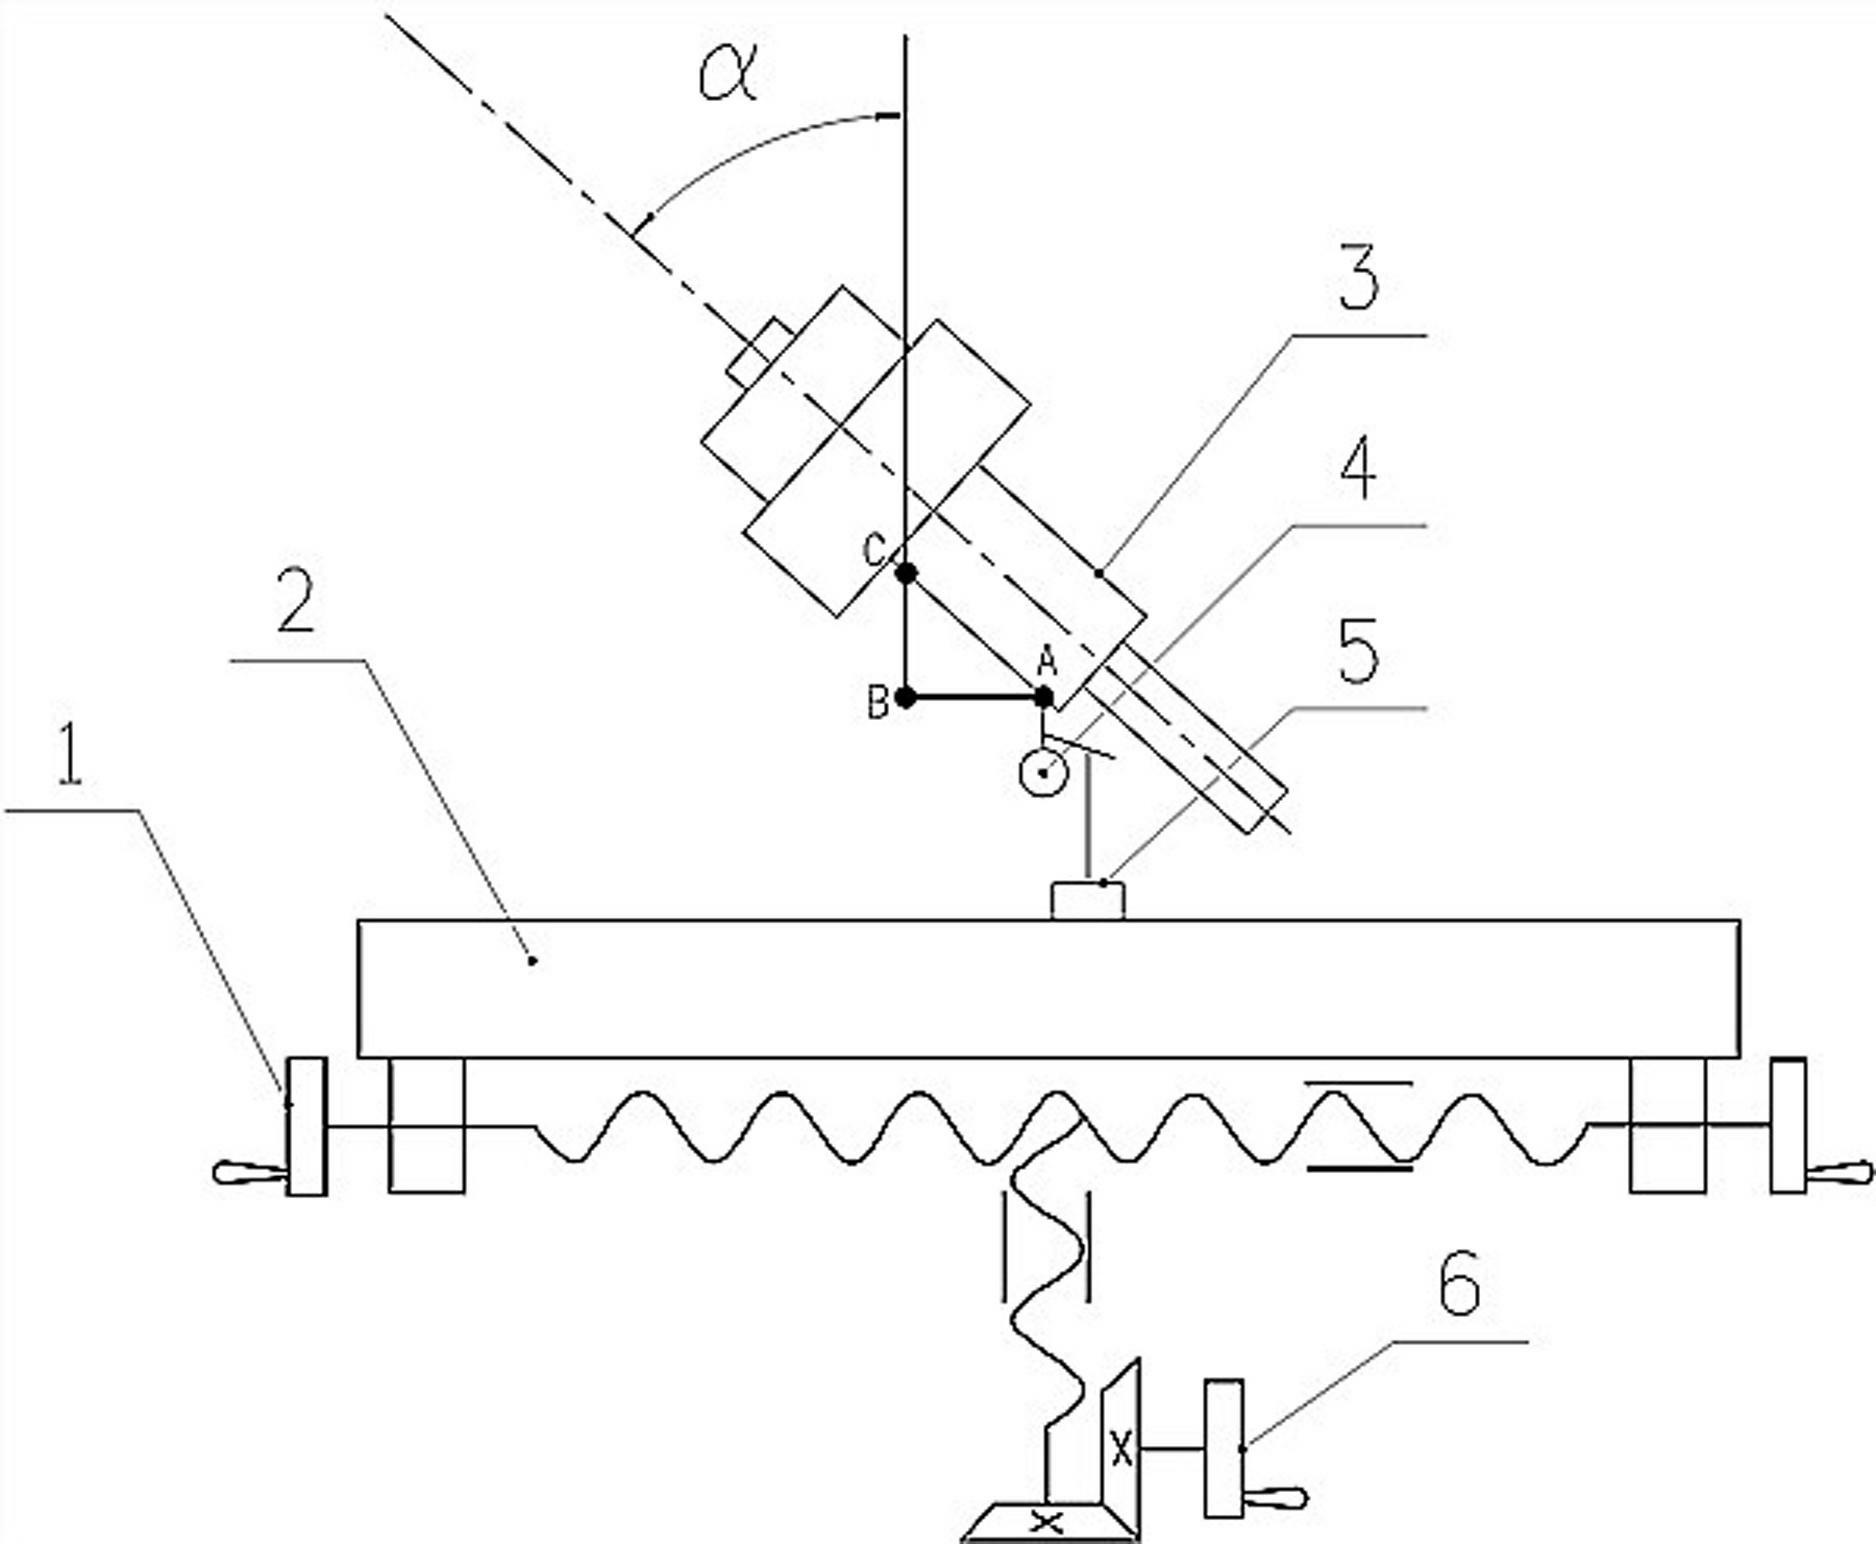 Method for accurately calibrating inclination of vertical milling head of milling machine by using dialgauge